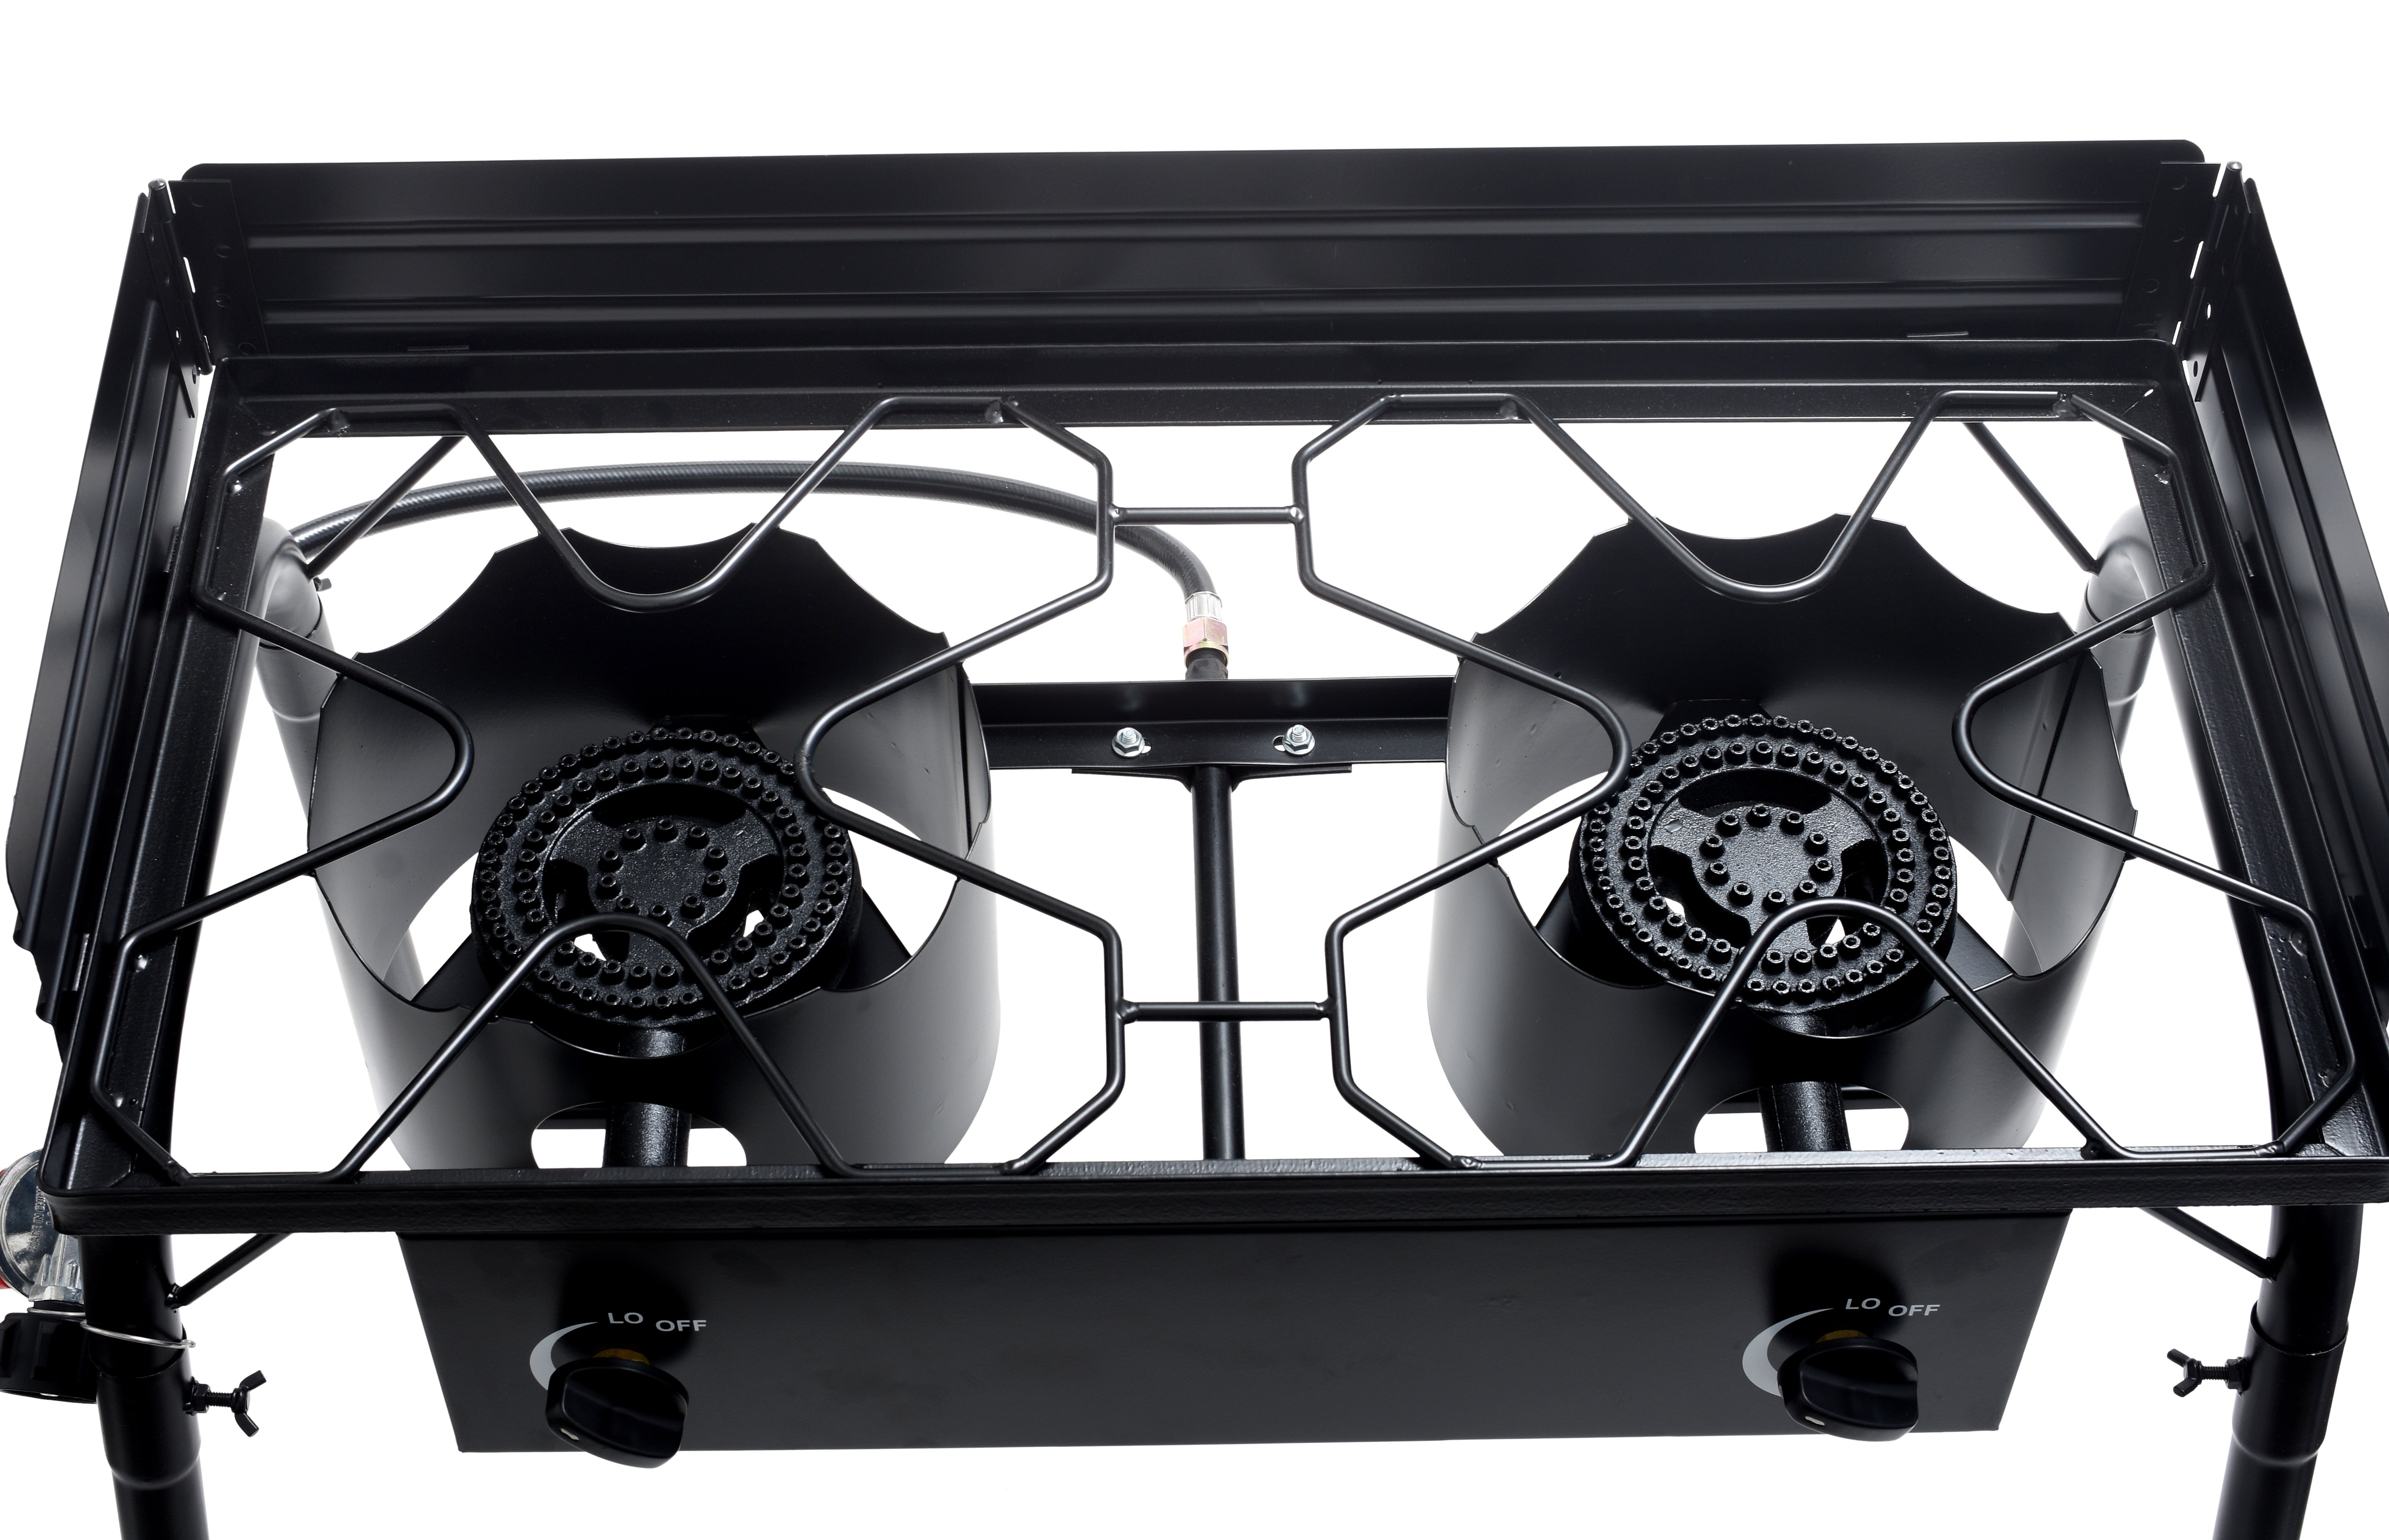 NGB-200C Stainless Steel Gas Cooker 2 Flame with Lid 9KW Gas Stove Camping  Stove